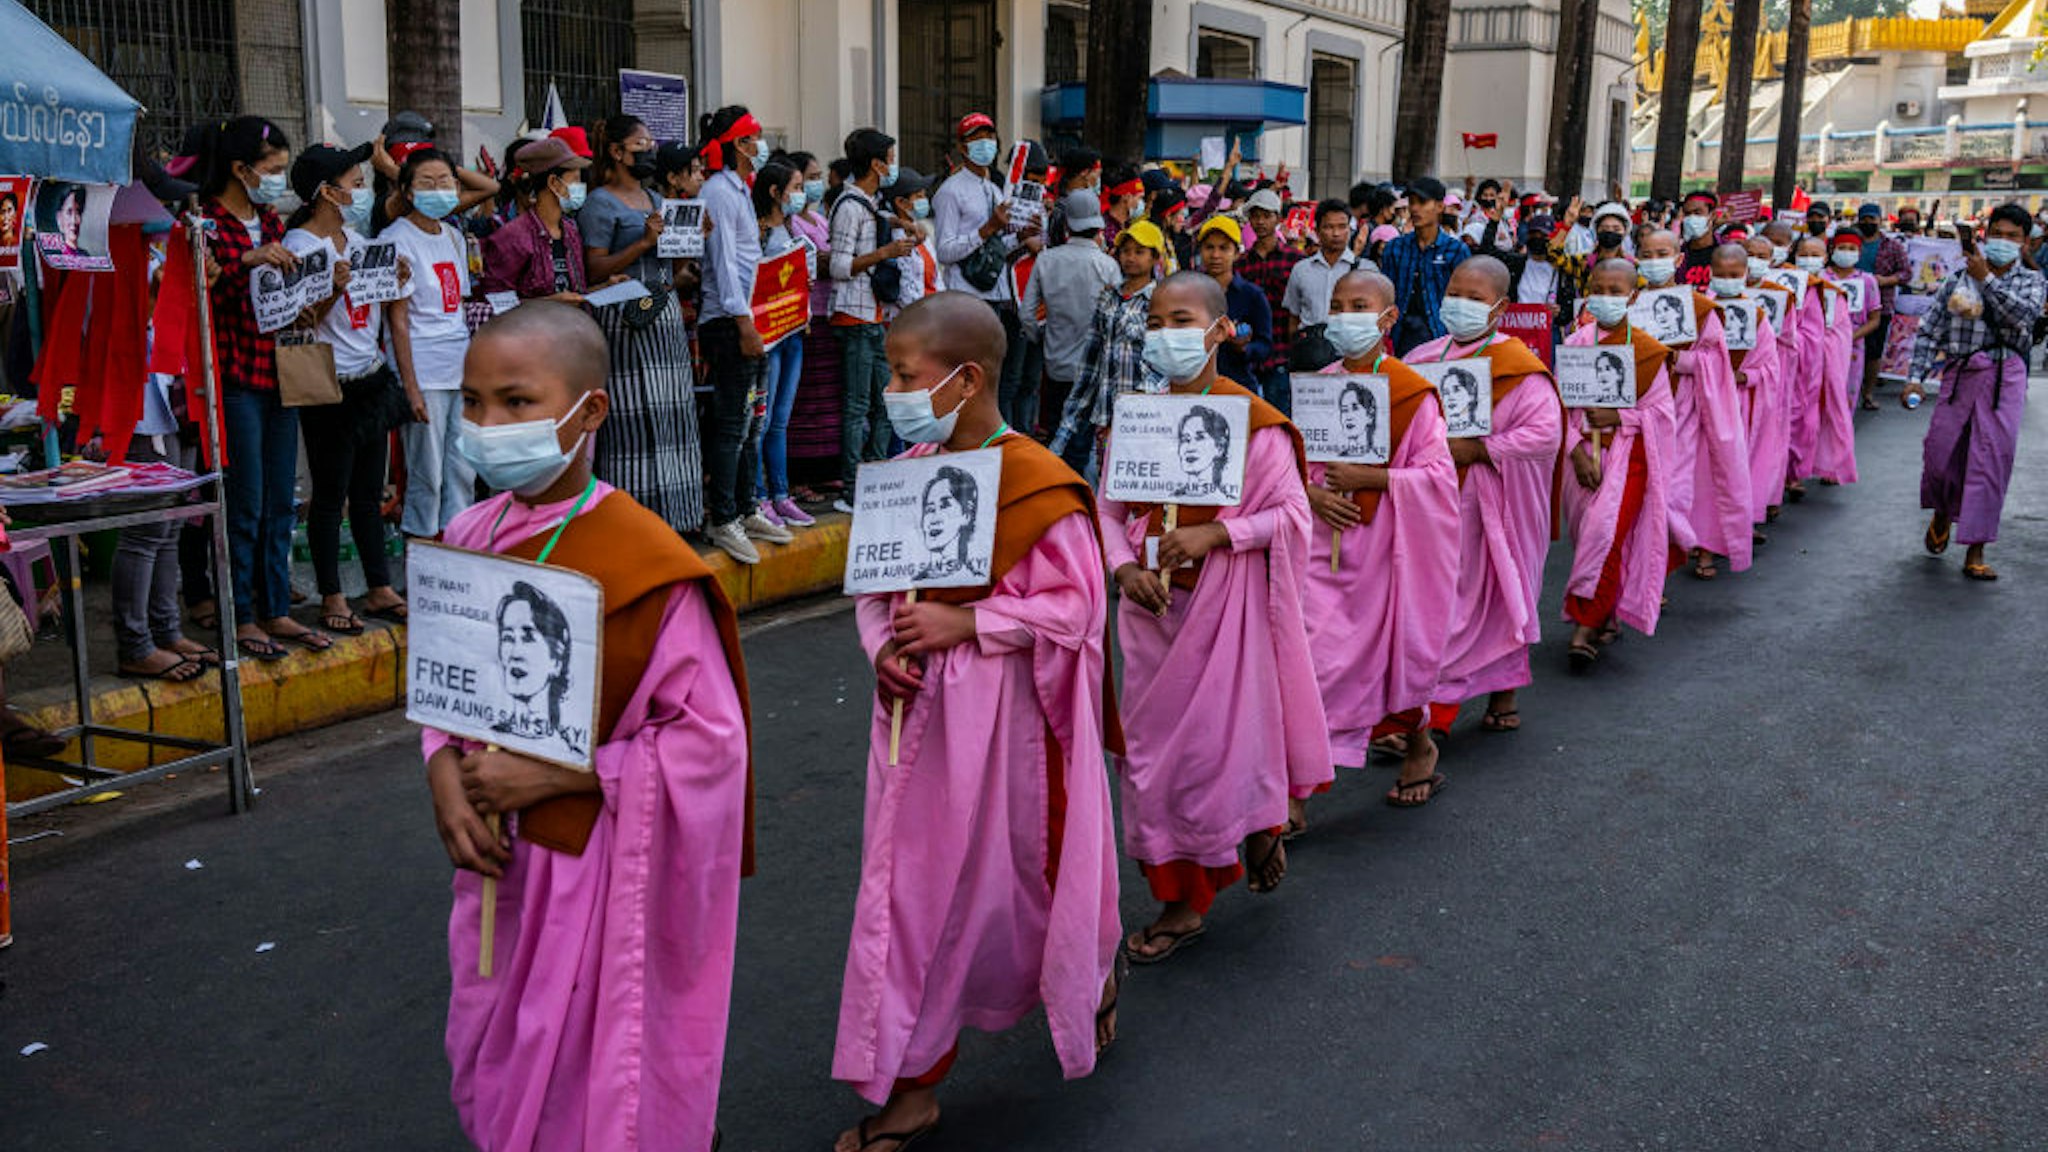 YANGON, MYANMAR - FEBRUARY 13: Buddhist monks hold placards featuring images of Aung San Suu Kyi during a protest on February 13, 2021 in Yangon, Myanmar. Myanmar declared martial law in parts of the country, including its two largest cities, as protests continued to draw people to the streets after the country's military junta staged a coup against the elected National League For Democracy (NLD) government and detained de-facto leader Aung San Suu Kyi. The U.S. government imposed sanctions and froze the U.S. assets of several of the coup's leaders and their families. (Photo by Hkun Lat/Getty Images)